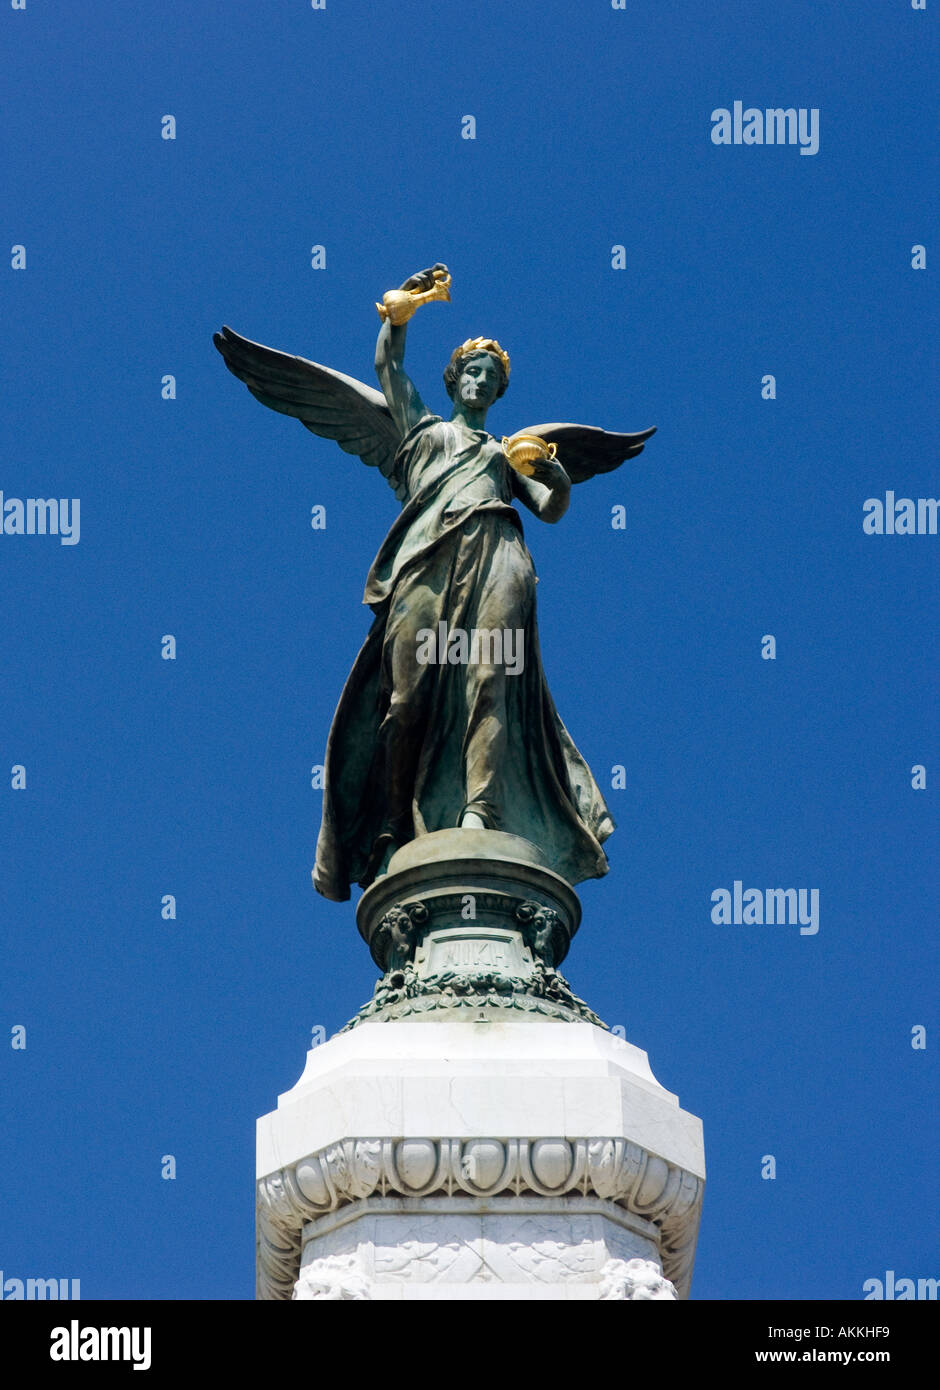 Monument to Nike goddess of victory in the Jardin Albert 1 - mythical founder of the city on Nice, Cote dAzur, Riviera Stock Photo - Alamy